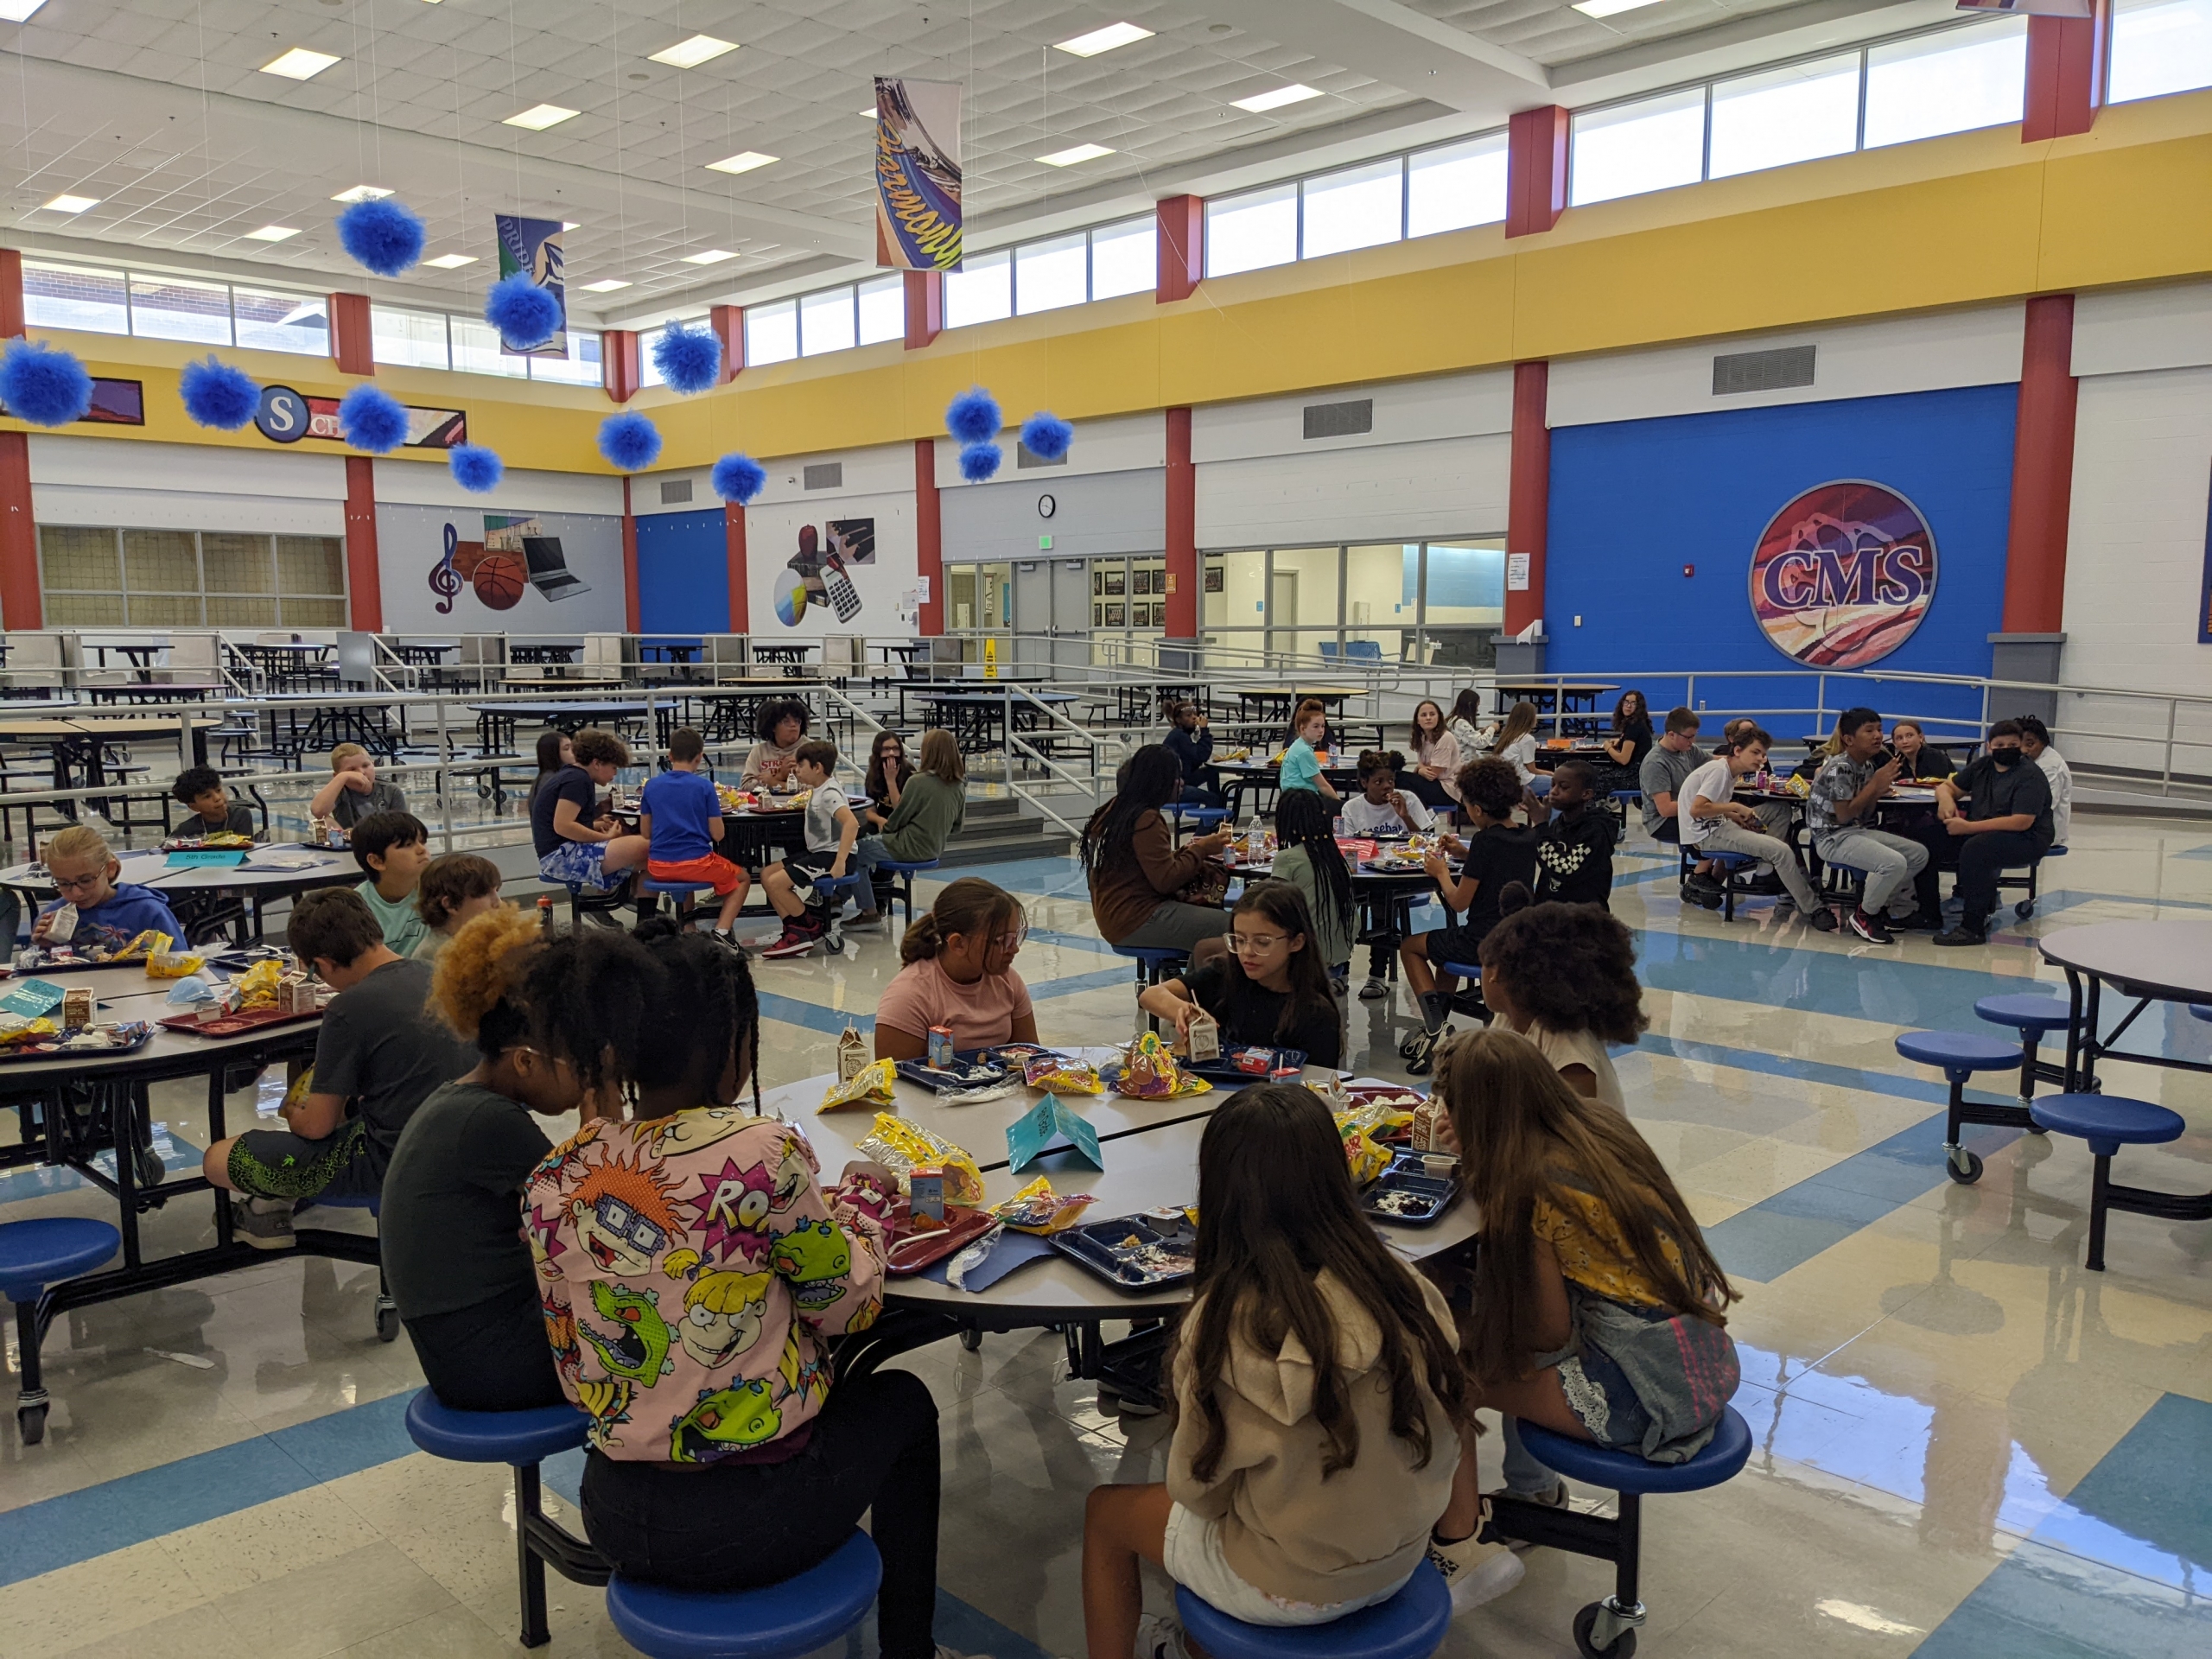 Clark Middle School planned a special "New Student Breakfast" for the almost 60 new enrollees. Students were served a delicious breakfast followed by introductions, games, and a little dancing! The Clark staff is excited to have these new friendly faces!